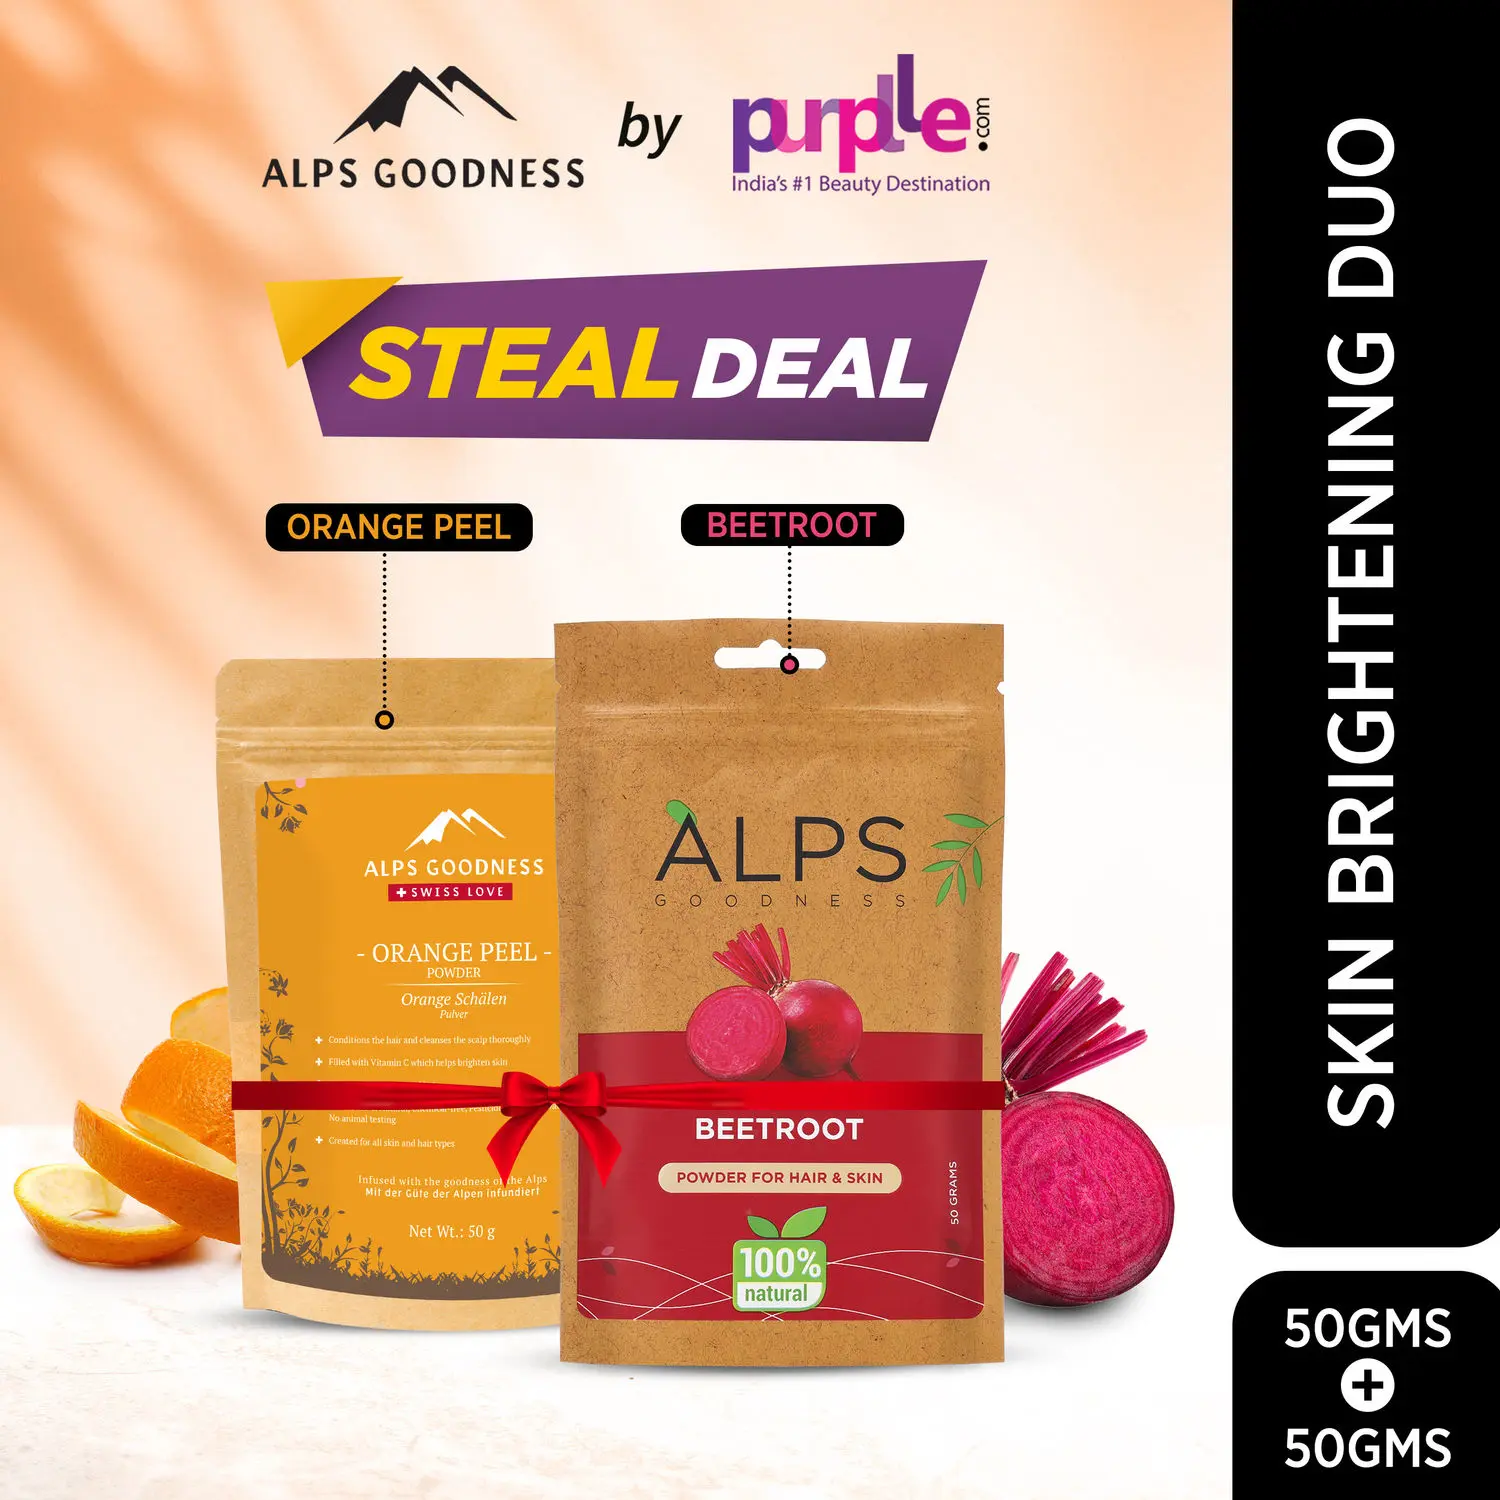 Alps Goodness Brightening Duo (Pack of 2) I 100% Natural Beetroot & Orange Peel Powder I Super Savings Pack I Best for Hair & Skin I Festive Glow Pack (2 X 50g)